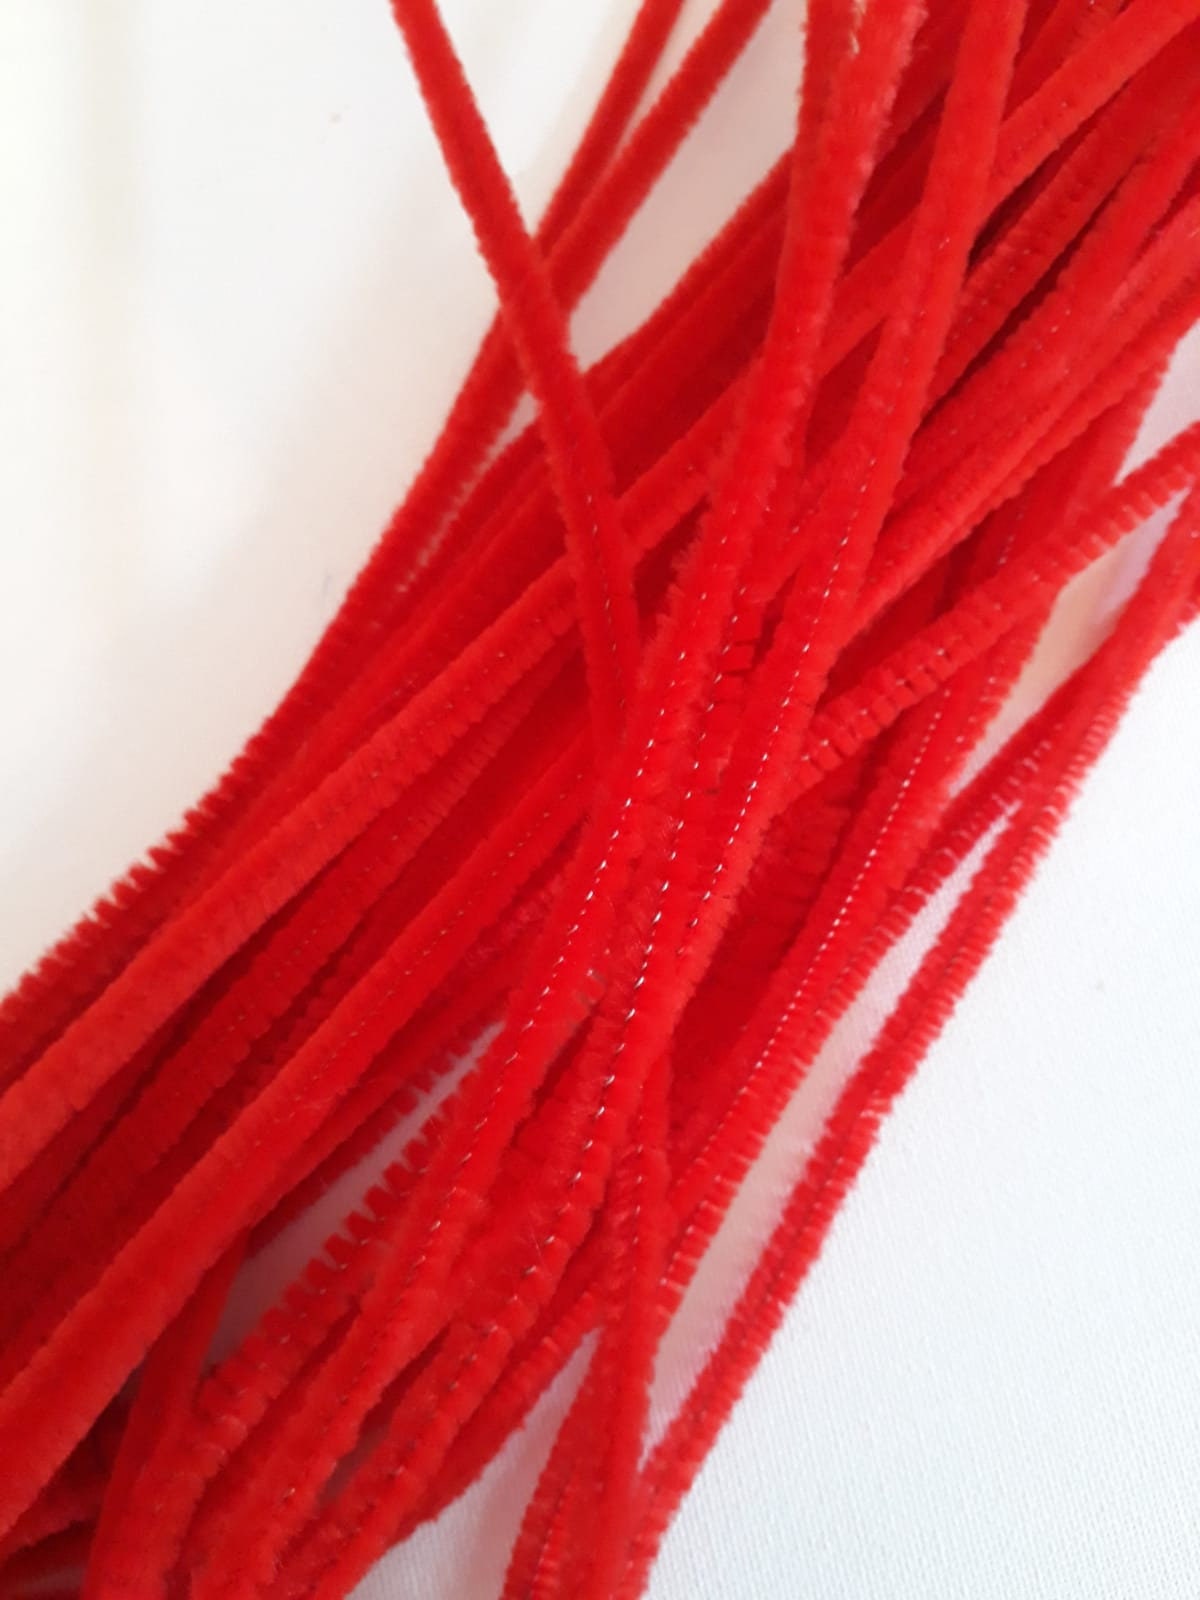 Glitter Pipe Cleaners 100 Pack Craft Stems Short Tinsel Pipecleaners 15cm  Glittery Xmas Crafting Pipe Cleaners 